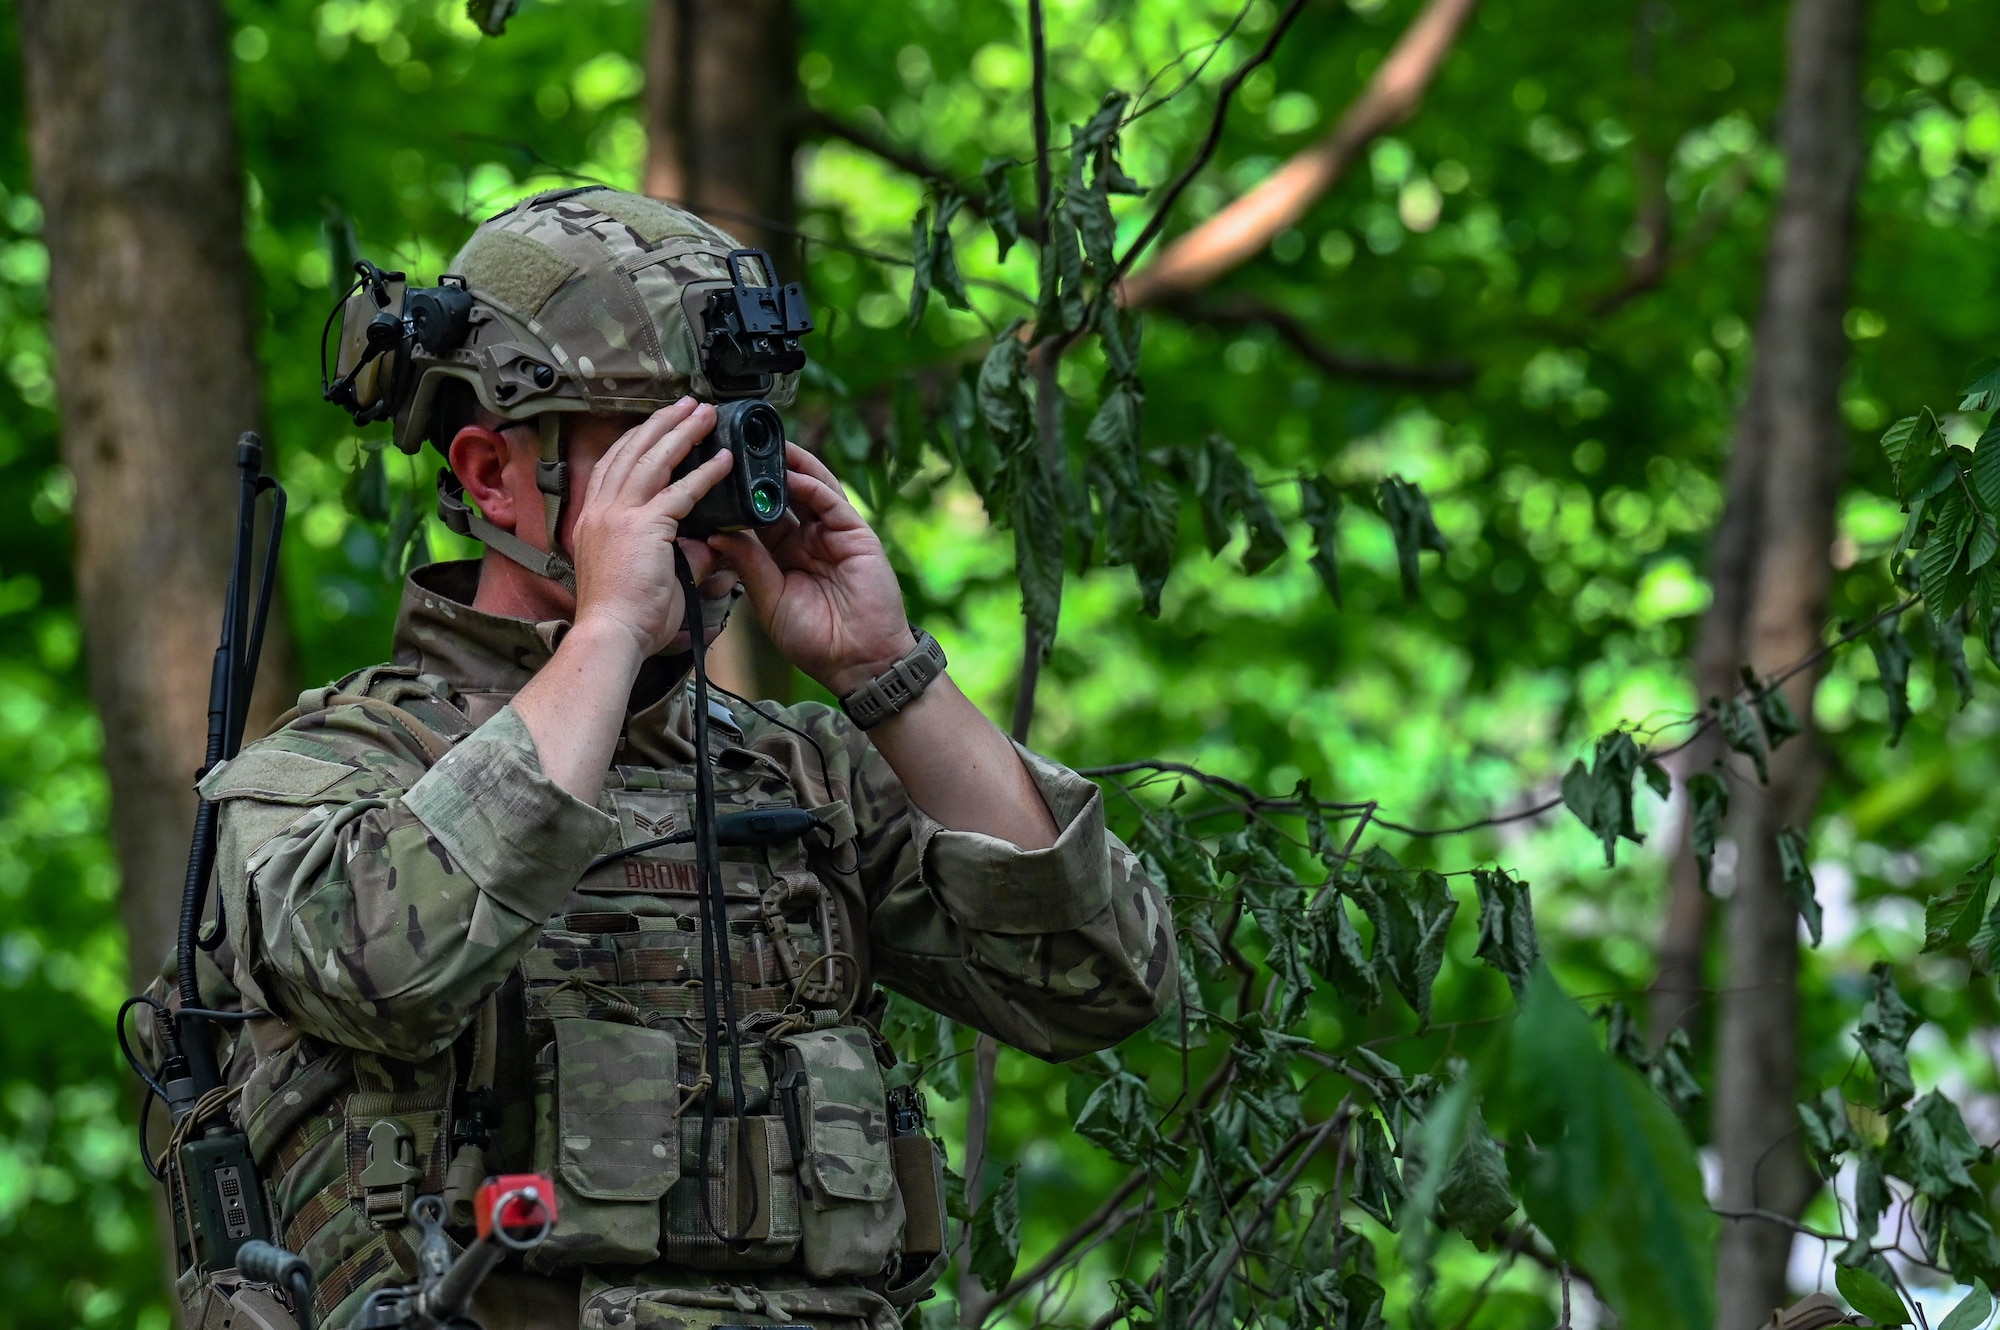 Senior Airman Kody Brown, a Defender assigned to the 301st Security Forces Squadron, Carswell Field, Naval Air Station Joint Reserve Base Fort Worth, Texas, uses a range estimator to gauge the distance to an objective on June 15, 2023, at Camp James A. Garfield Joint Military Training Center, Ohio.